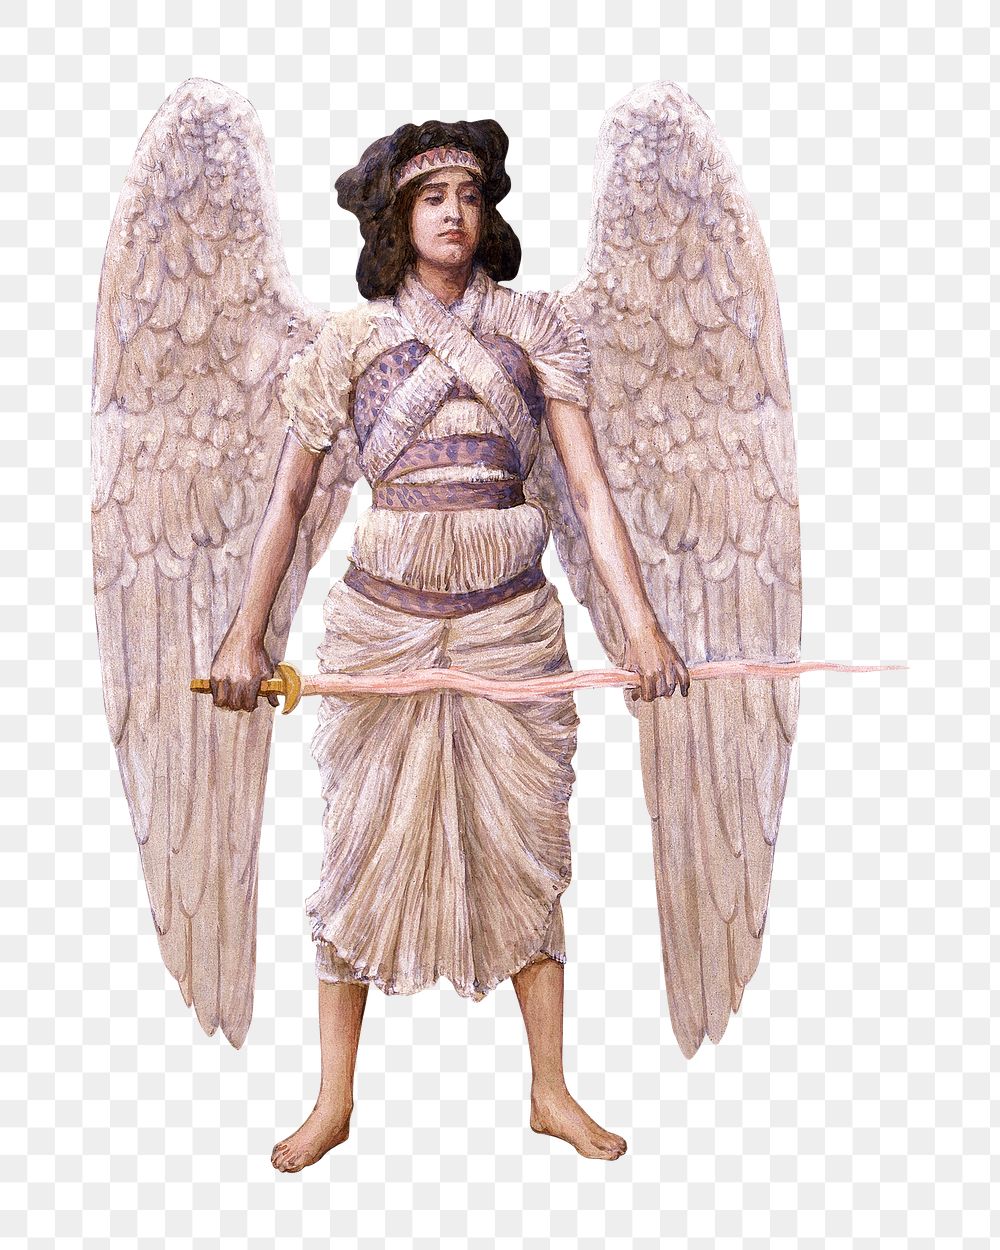 Vintage angel png, transparent background. Remixed by rawpixel.